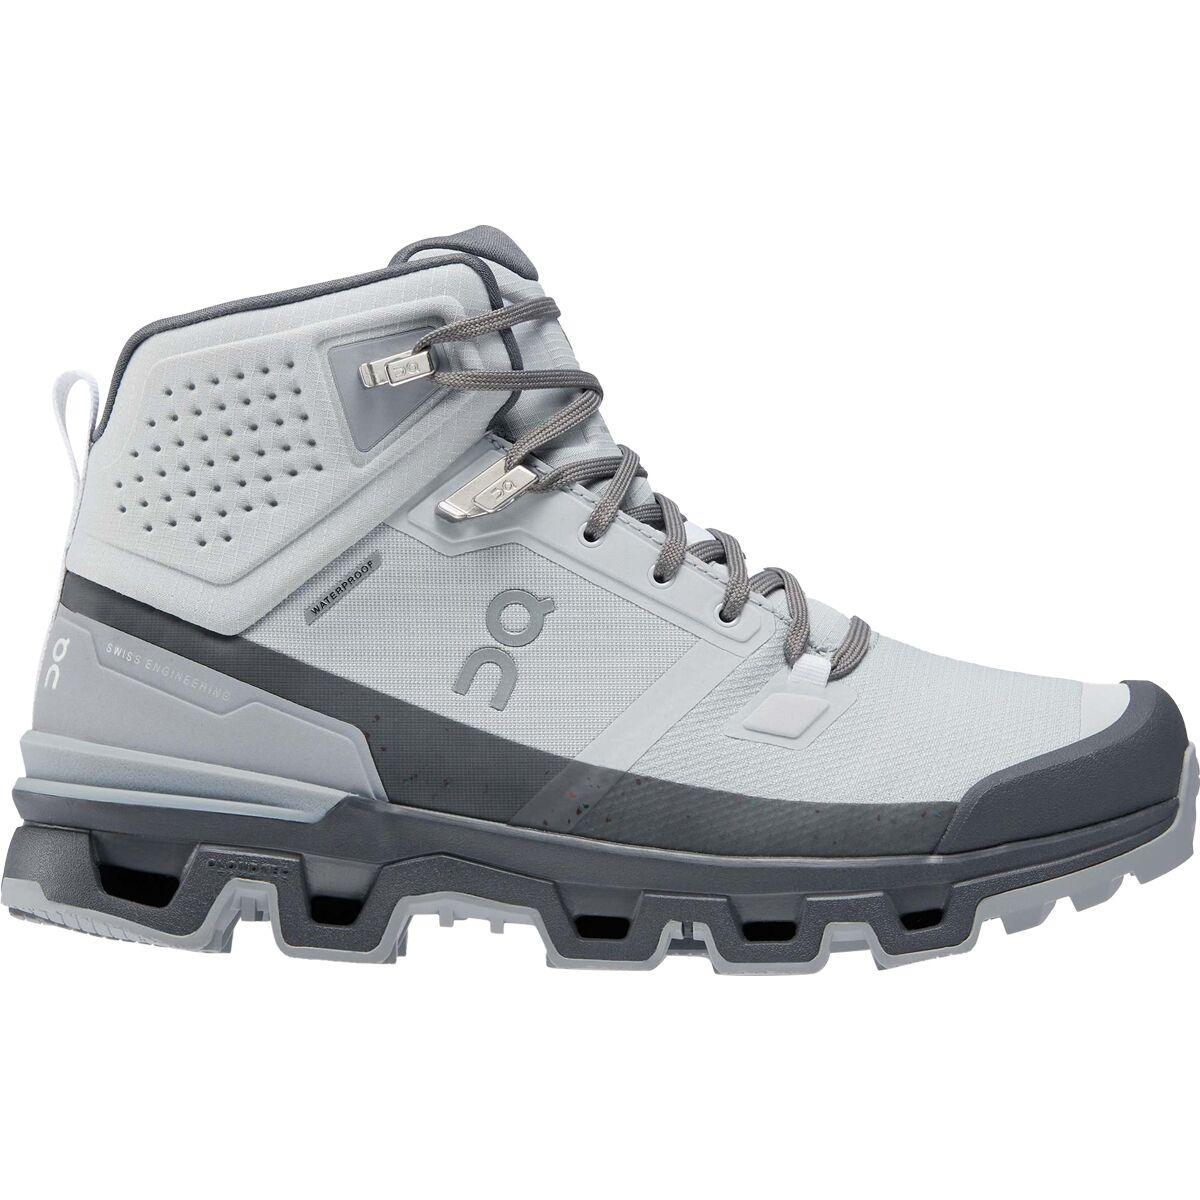 On Cloudrock 2 Waterproof Hiking Boot Product Image